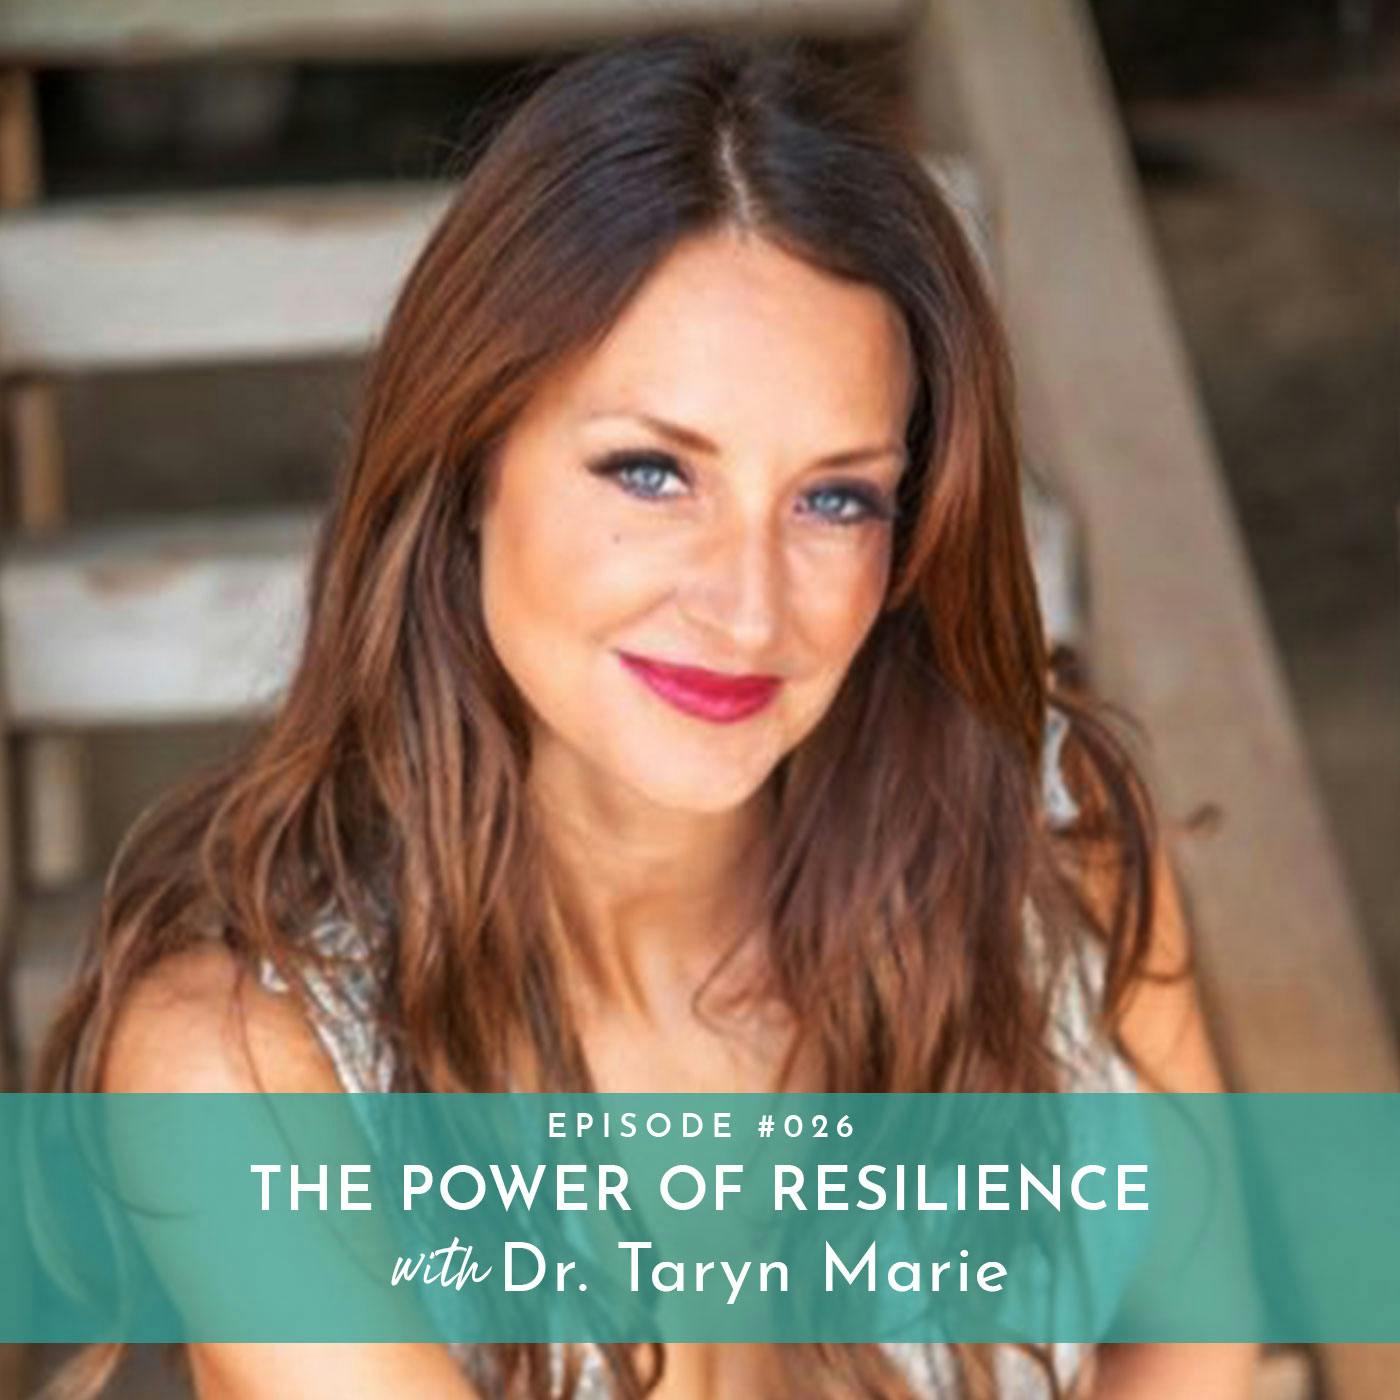 The Power of Resilience with Dr. Taryn Marie